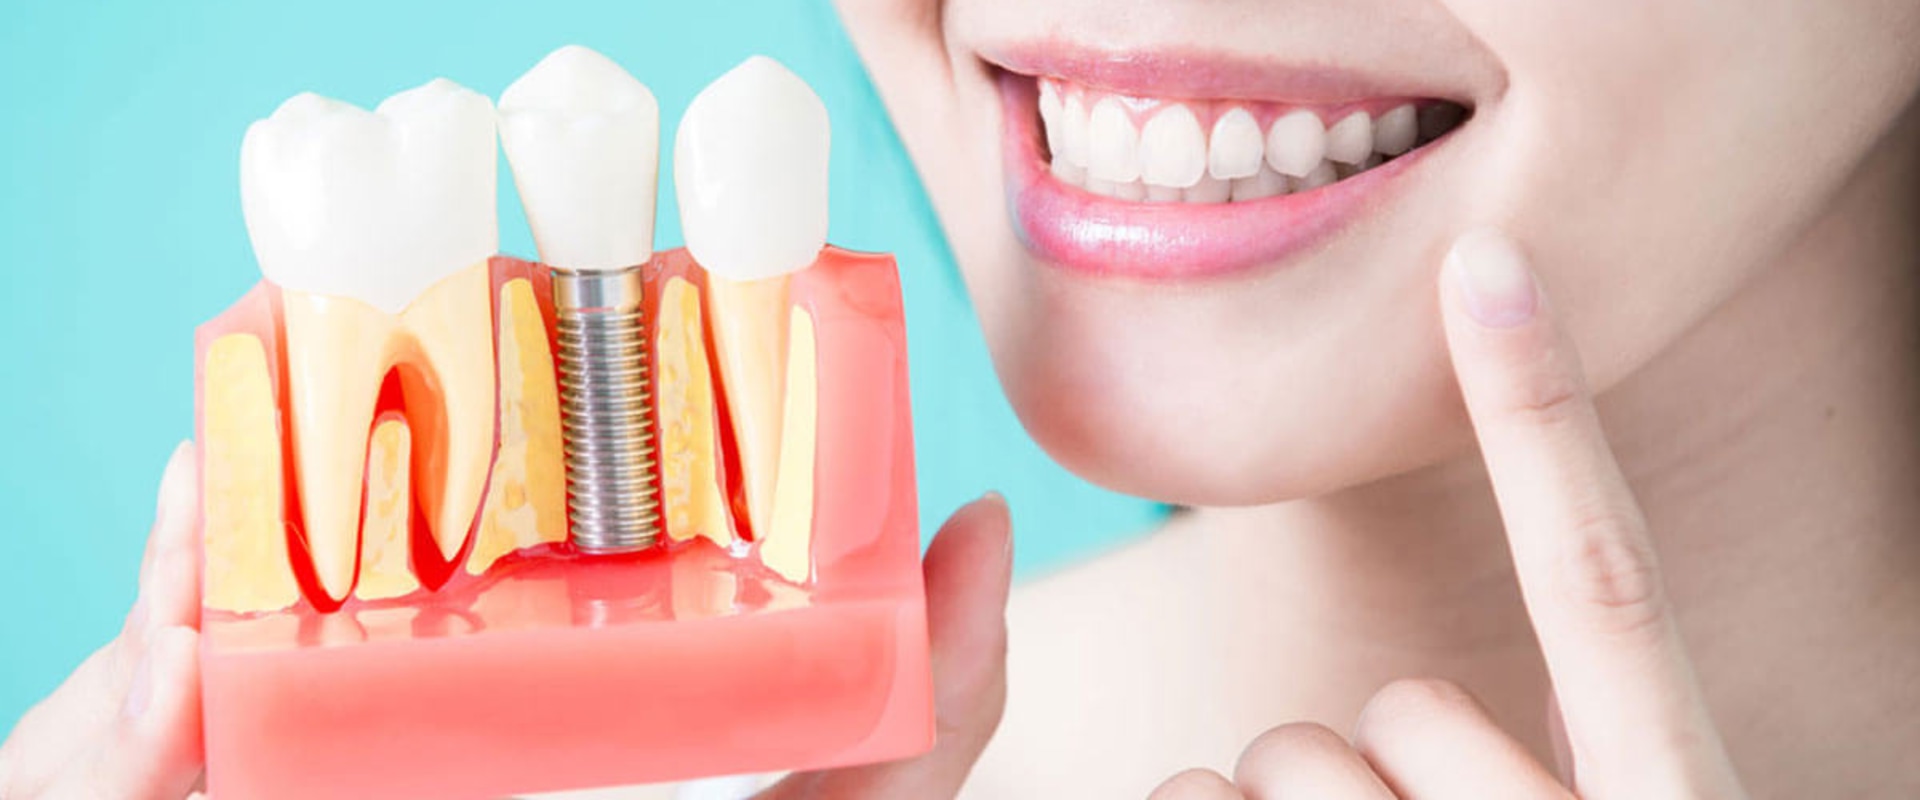 What is the disadvantage of dental implants?